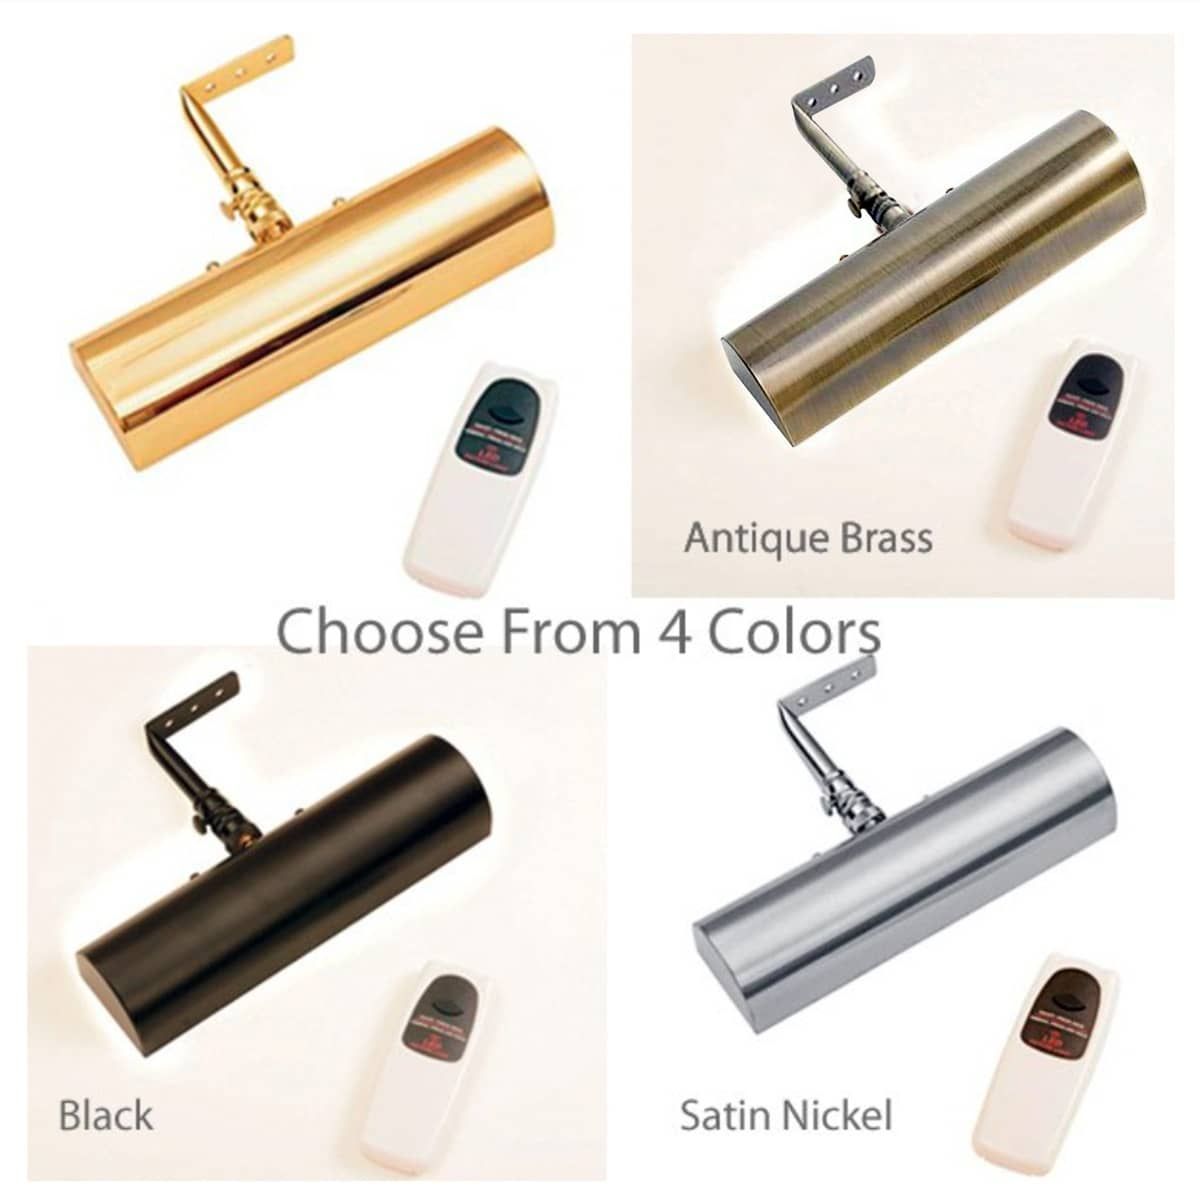 4 Color Options - Antique Brass, Polished Brass, Satin Nickel and Black